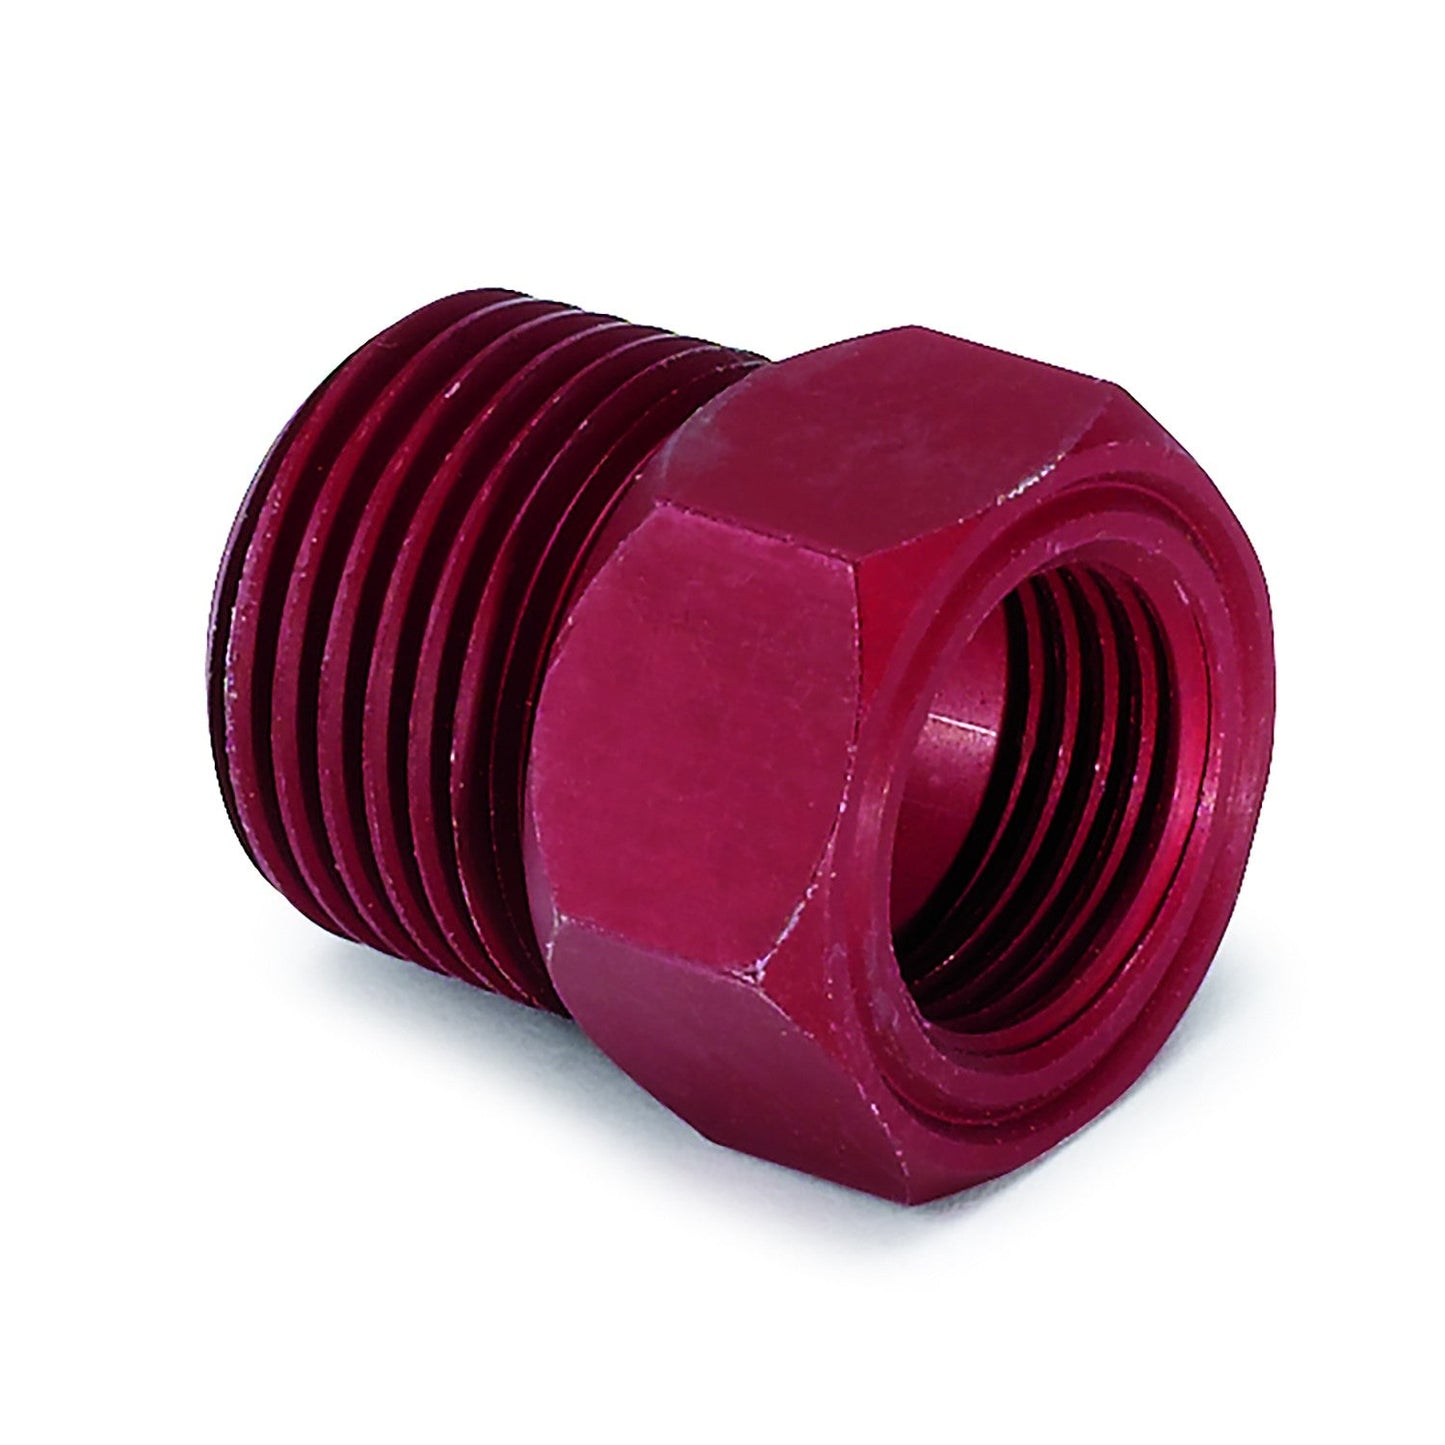 AutoMeter - FITTING, ADAPTER, 1/2" NPT MALE, ALUMINUM, RED, FOR MECH. TEMP. GAUGE (2273)